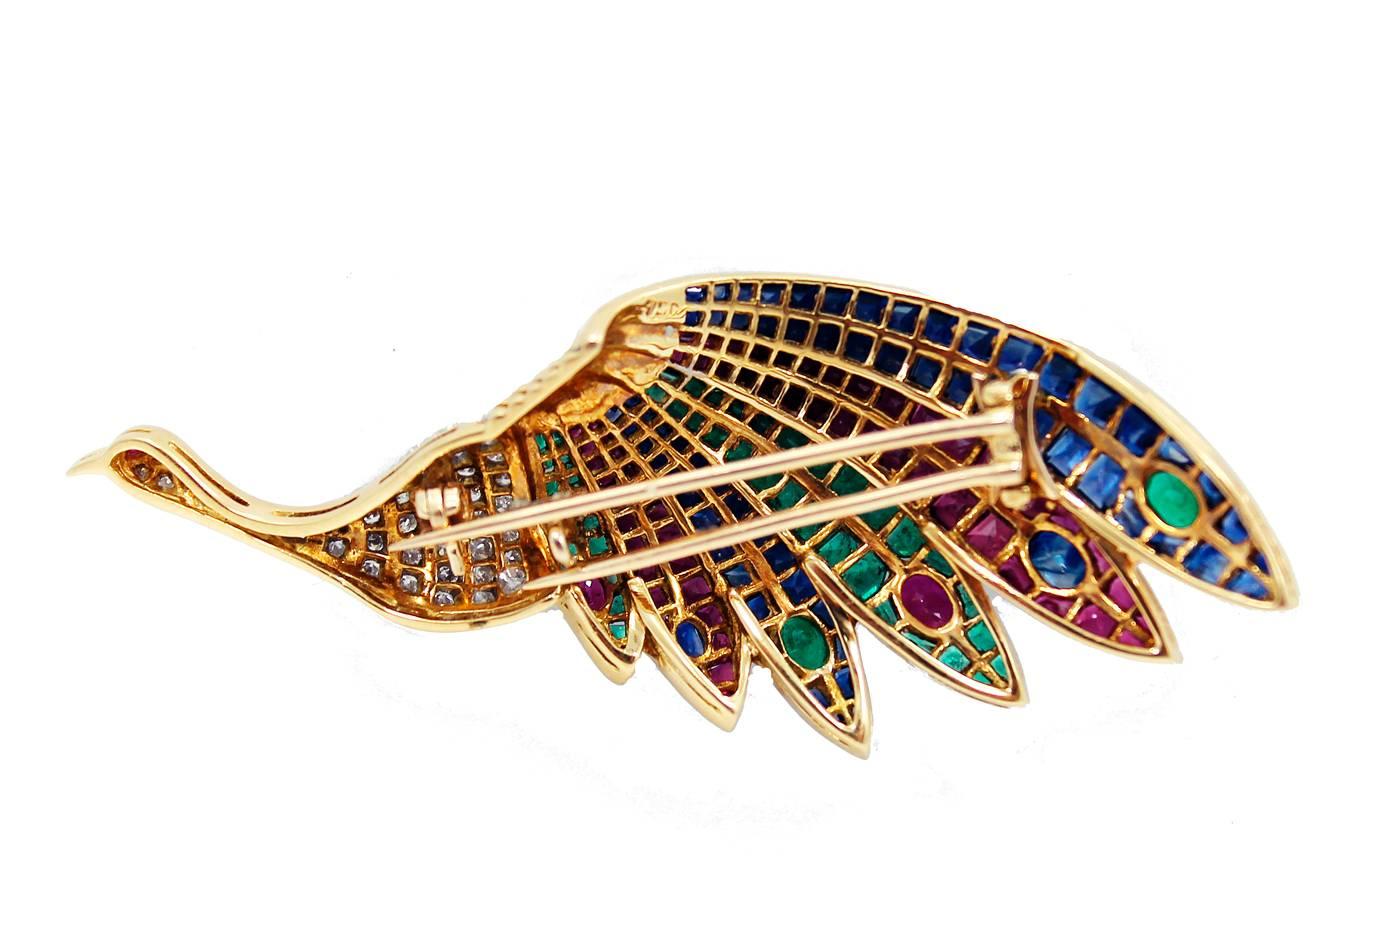 18K Yellow Gold Peacock Brooch with precious stones, This brooch contains 176 precious stones which include Rubies, Sapphires and Emeralds for a total of 10.60 carats. It also contains 42 Round Brilliant Cut Diamonds with a total of .75 carats, H-I